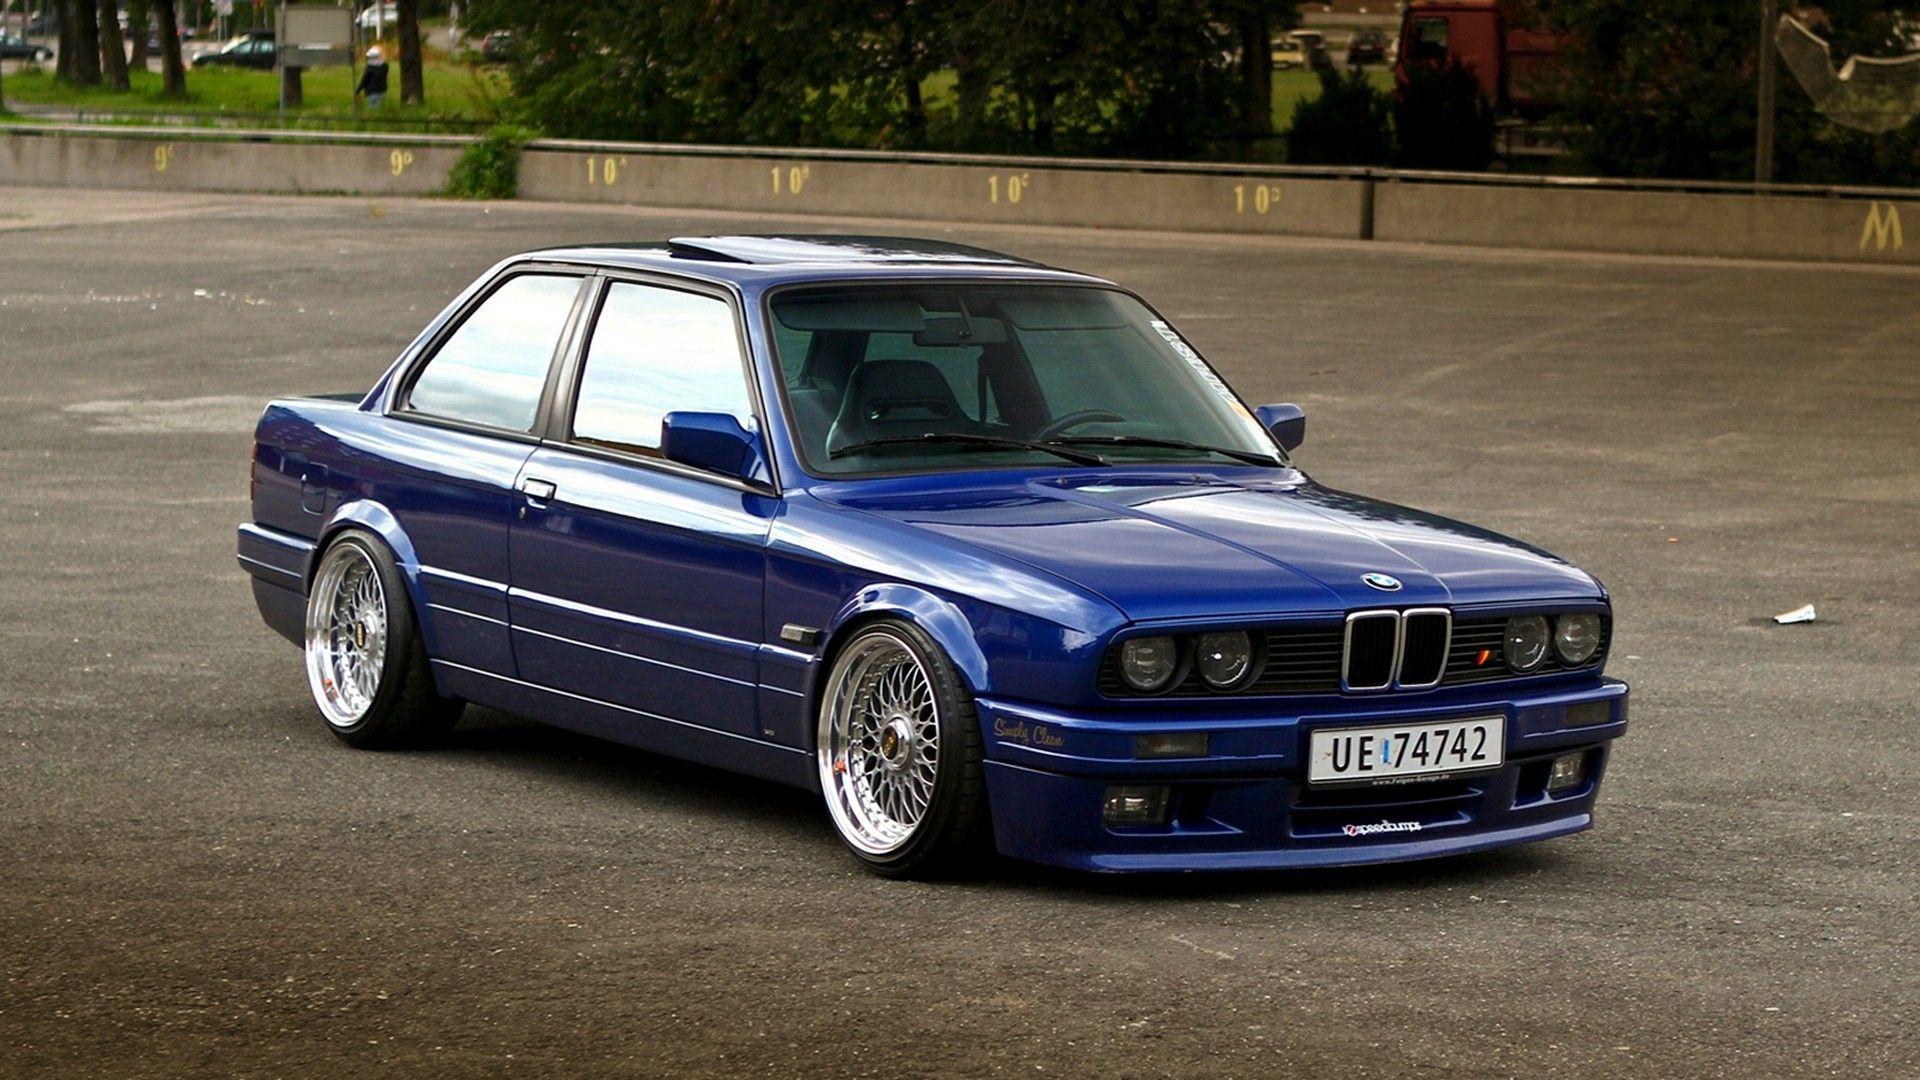 Germany, tuning, sport cars, BMW E classic cars, Clean, street